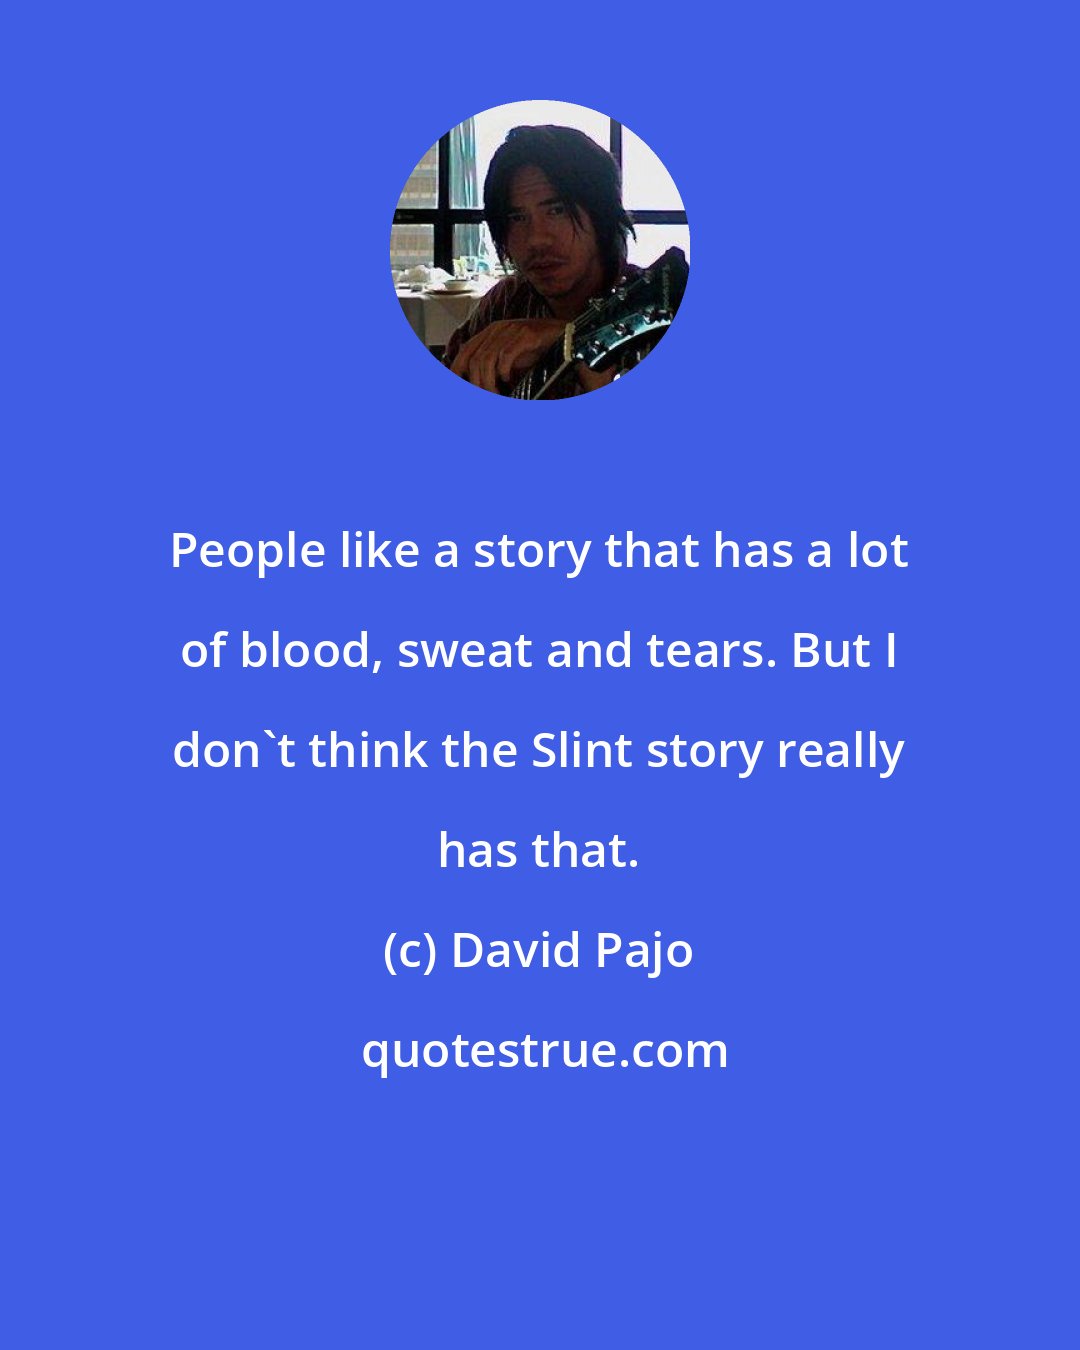 David Pajo: People like a story that has a lot of blood, sweat and tears. But I don't think the Slint story really has that.